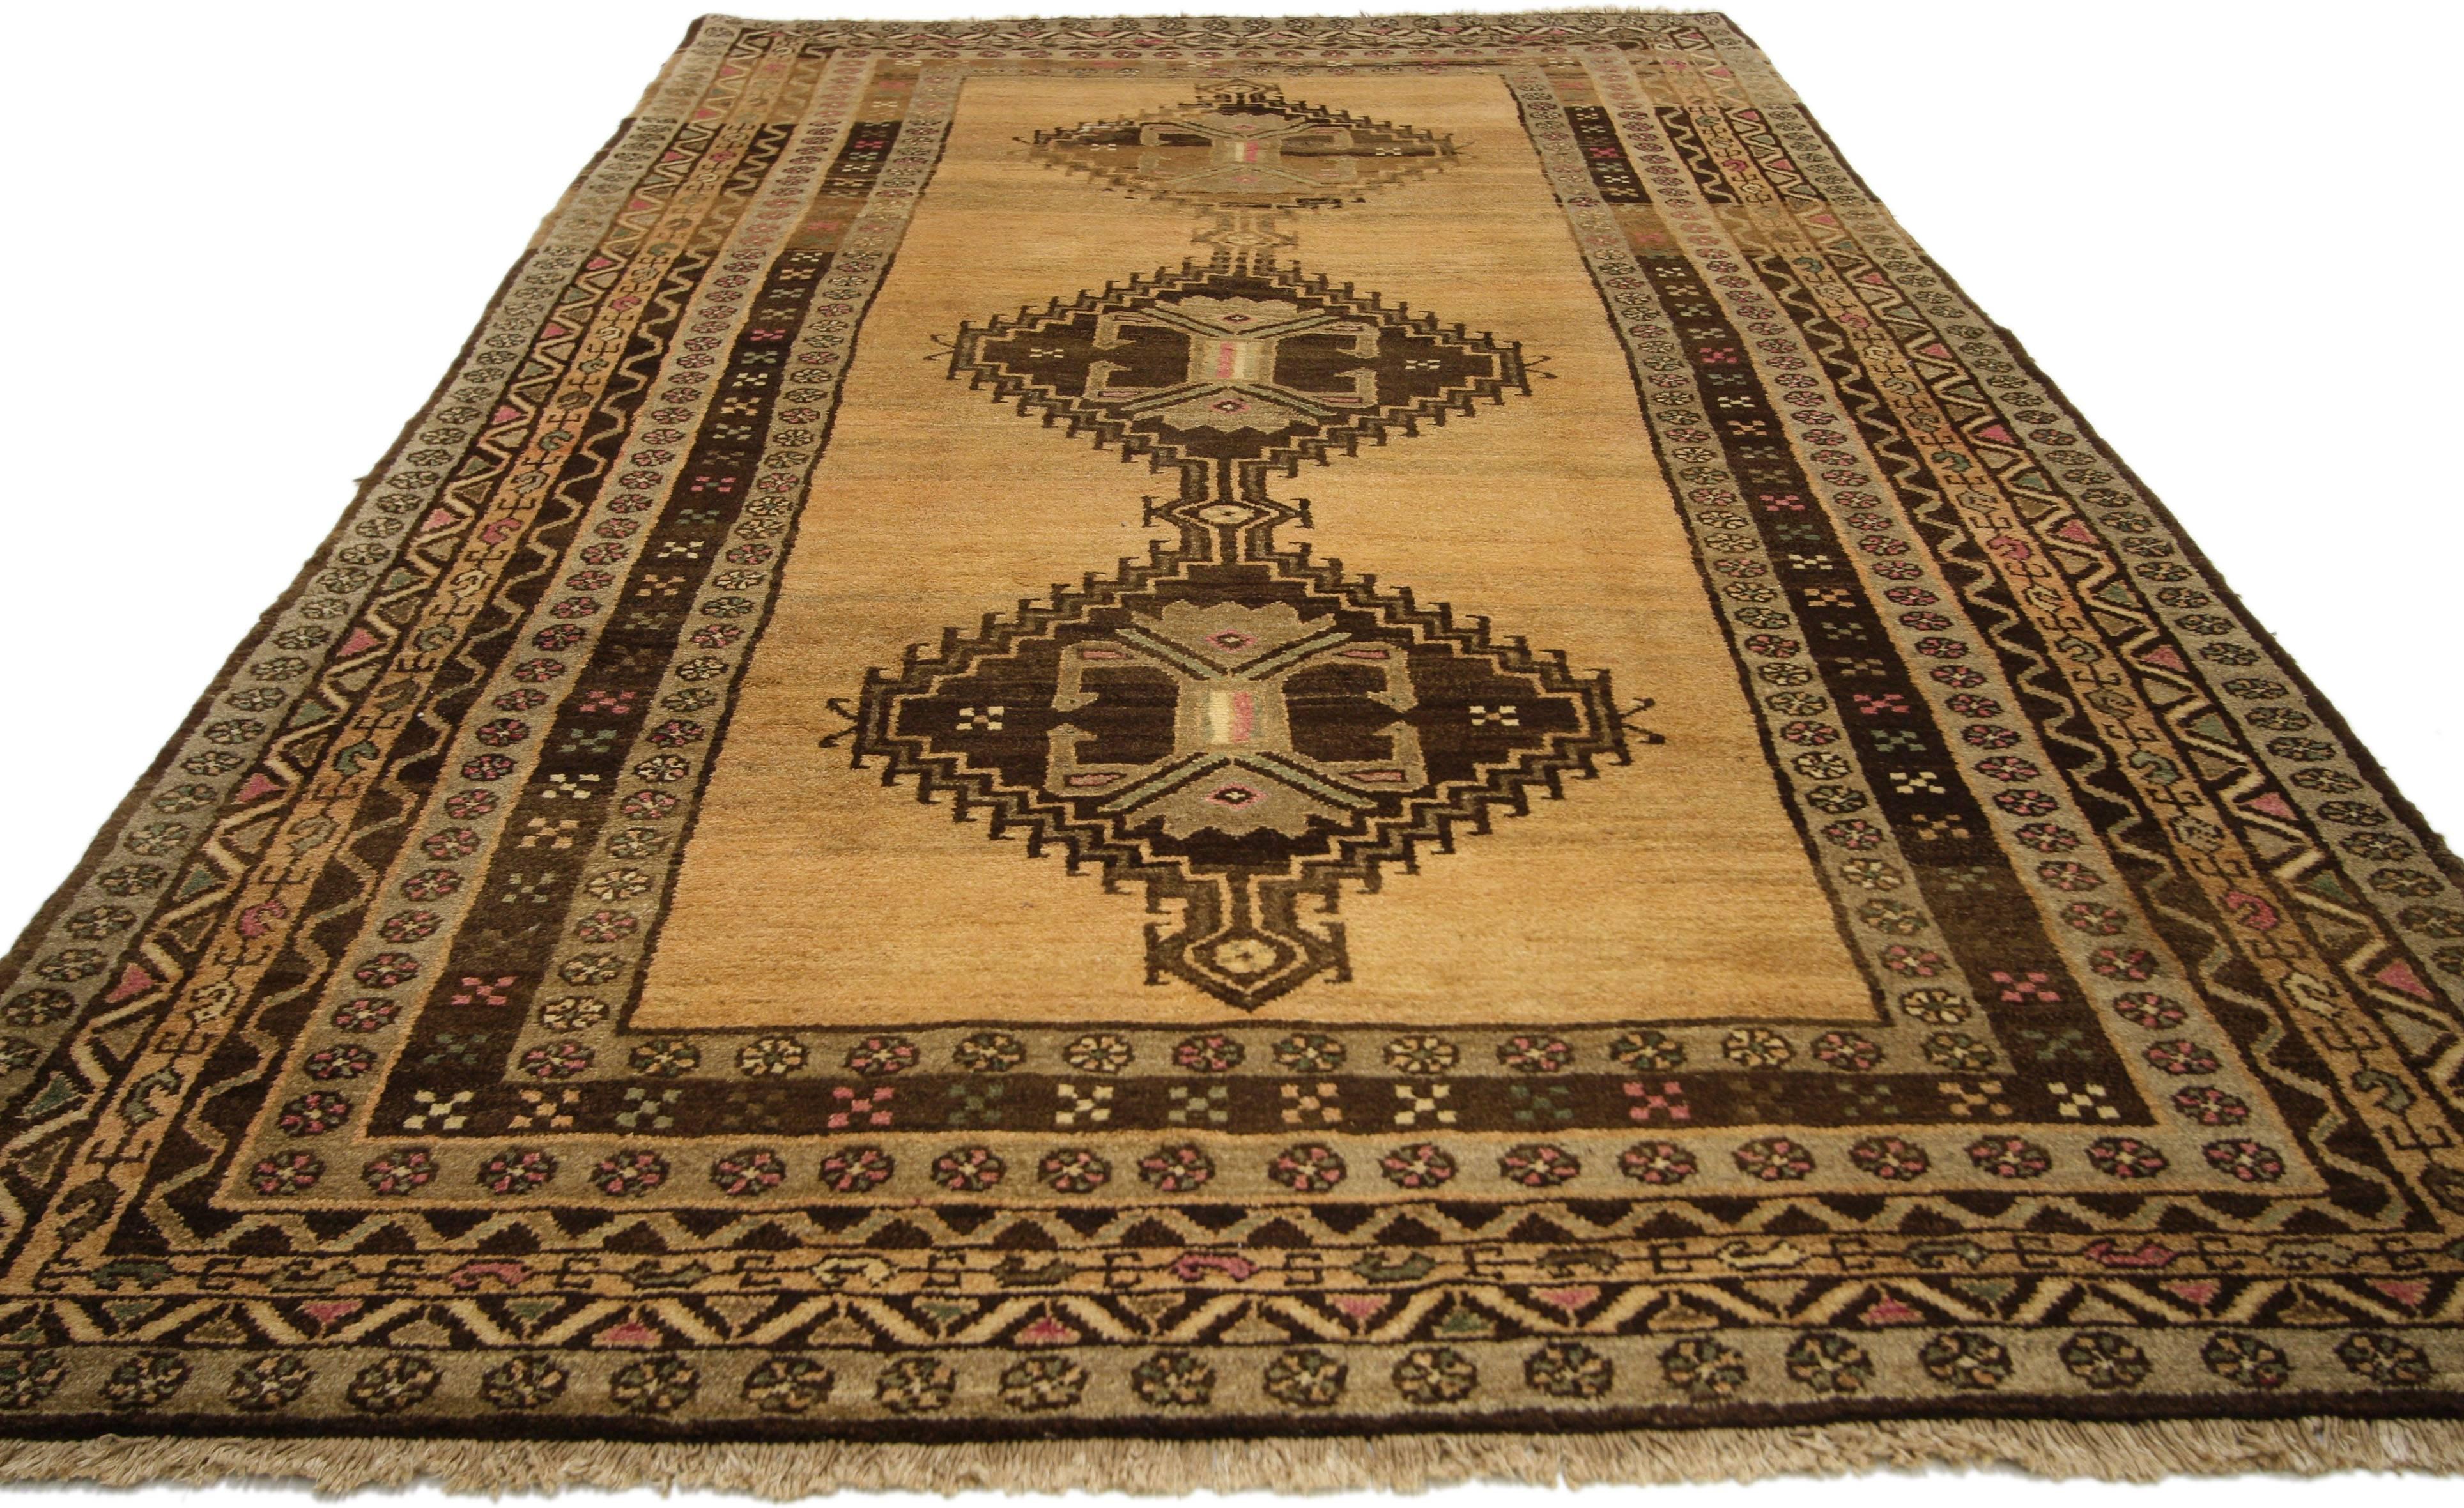 76159, vintage Persian Hamadan Gallery rug with tribal style. This vintage Persian Hamadan Gallery rug with tribal style features a bold composition of a pole medallion composed of three hooked diamonds connected by smaller diamonds at the